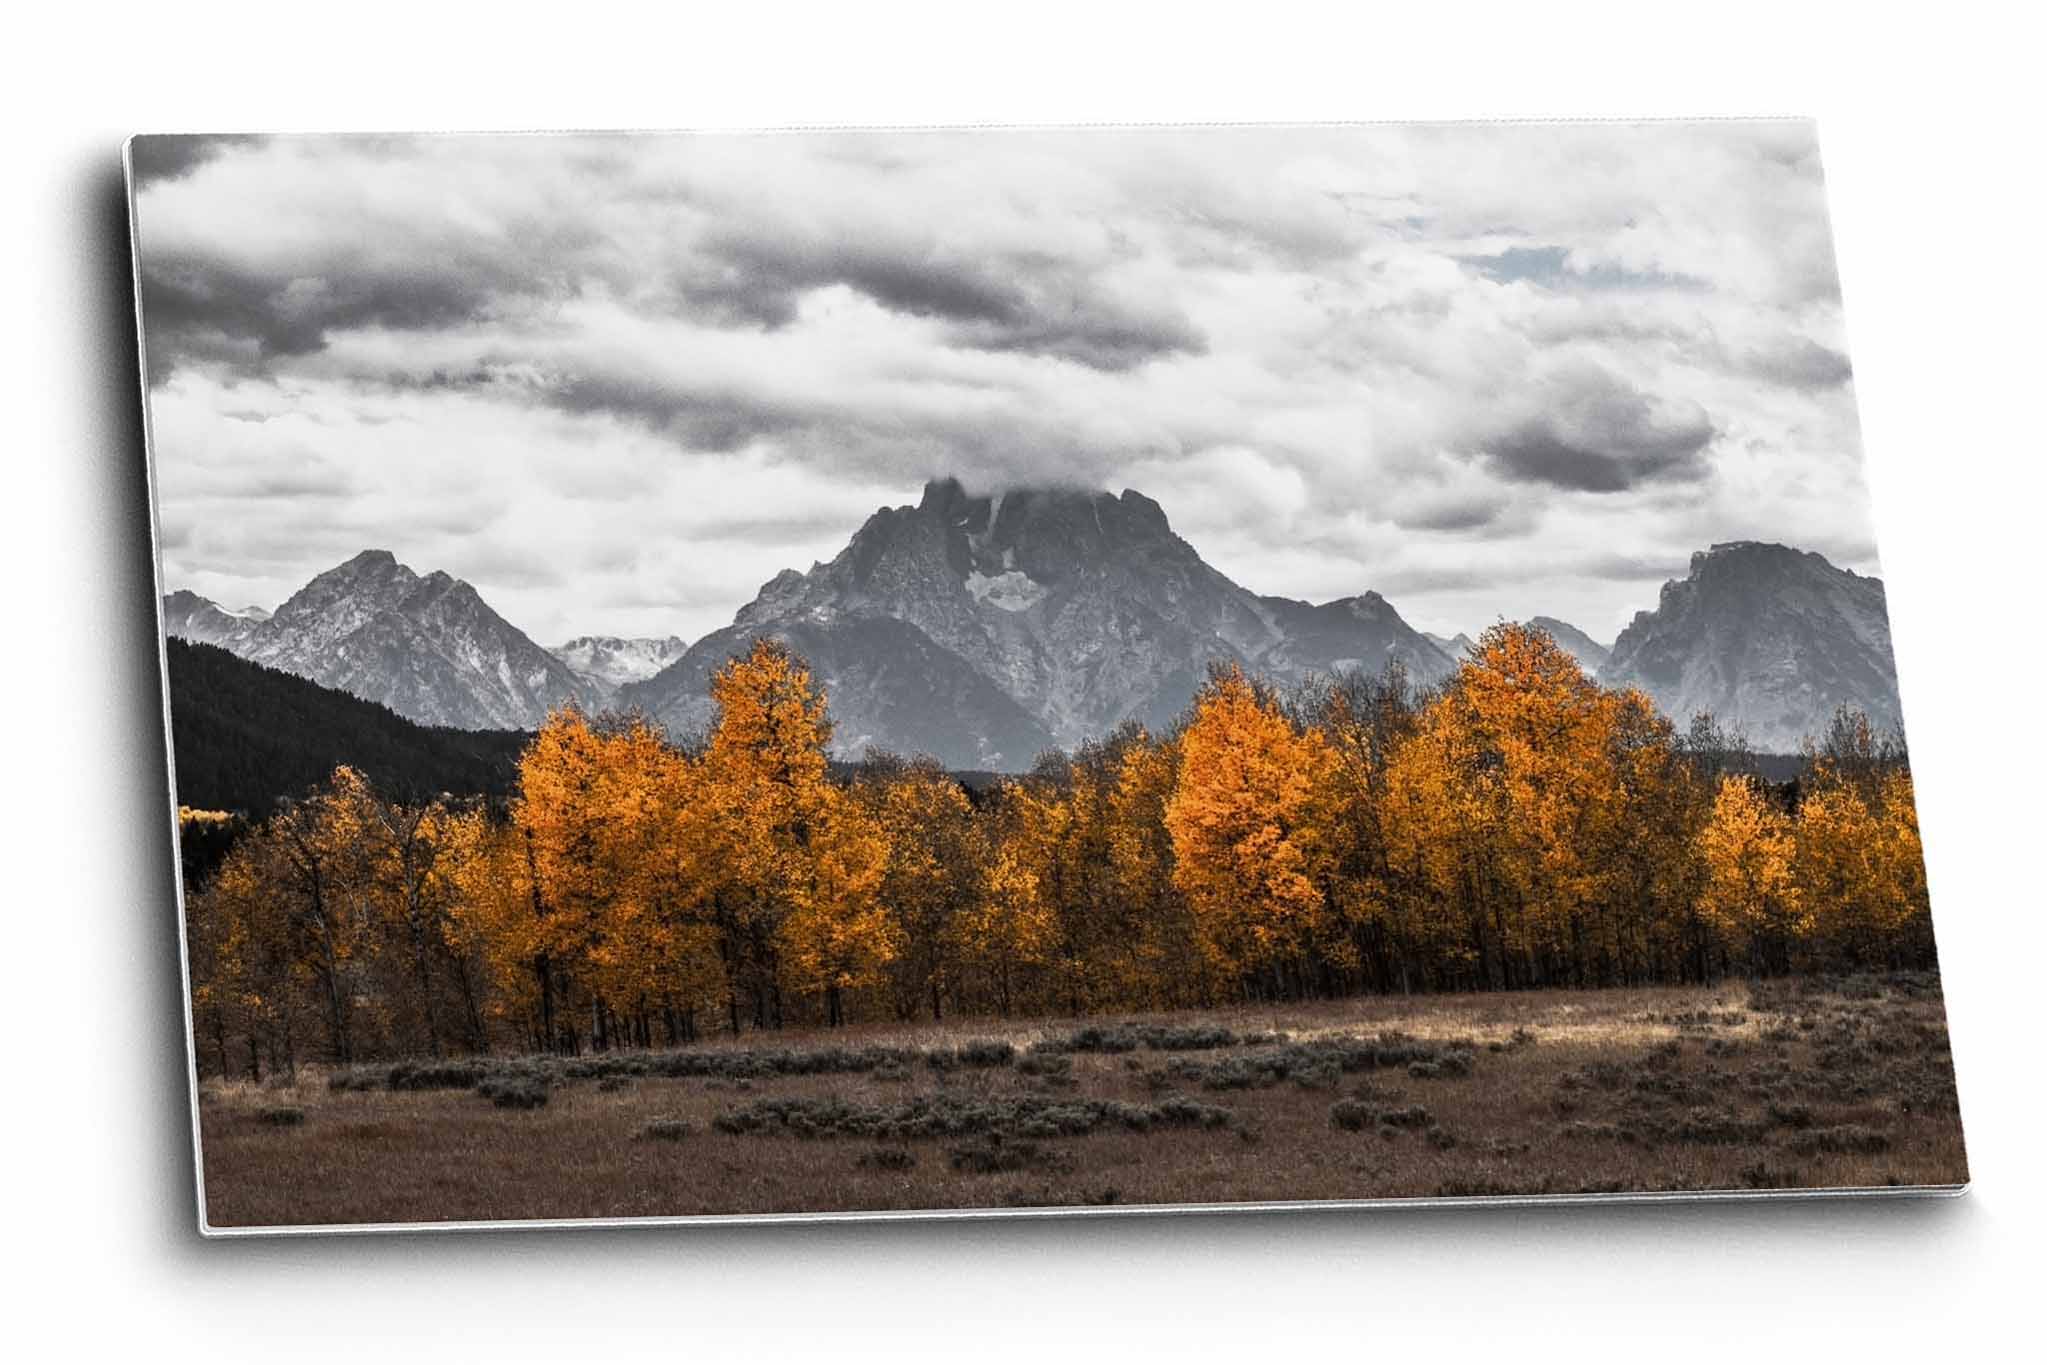 Rocky Mountain aluminum metal print of Mount Moran in black and white overlooking golden aspen trees in color on an autumn day in Grand Teton National Park, Wyoming by Sean Ramsey of Southern Plains Photography.